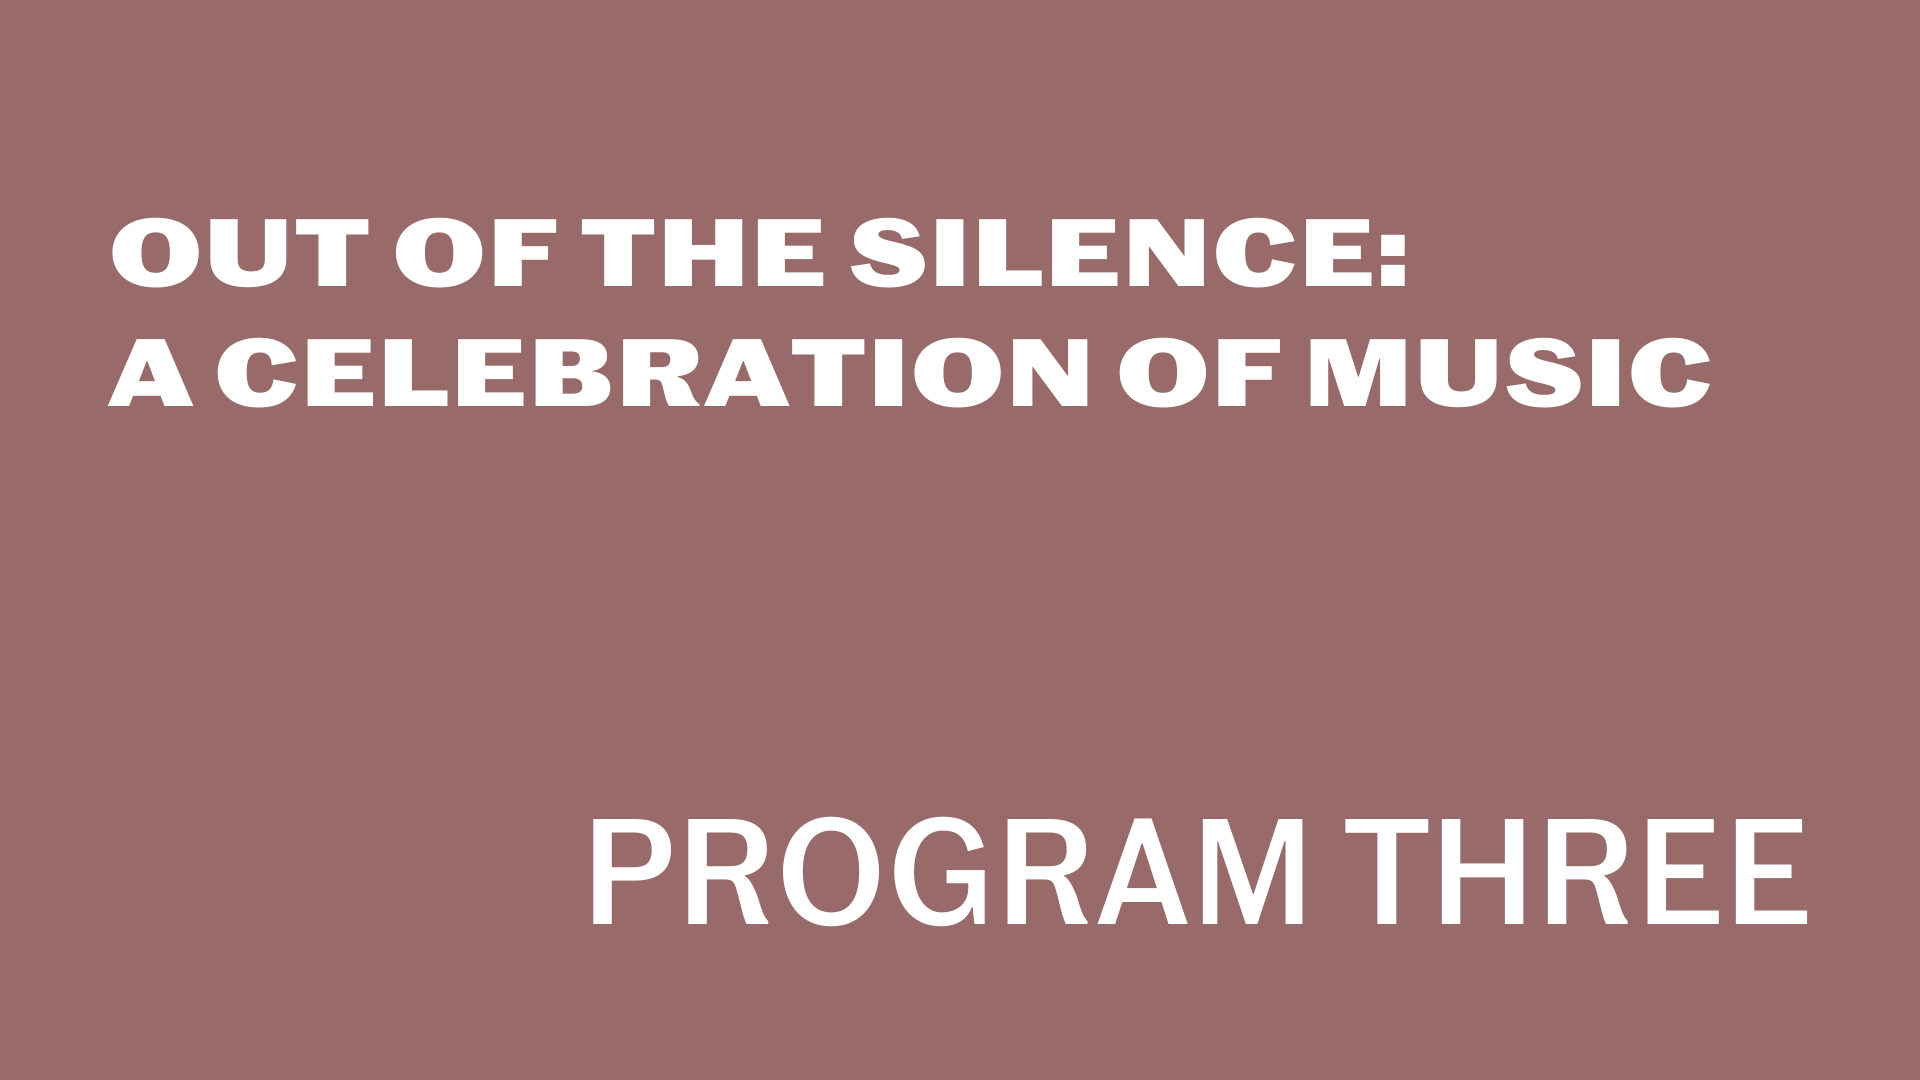 Visit https://fishercenter.bard.edu/events/out-of-the-silence-3/